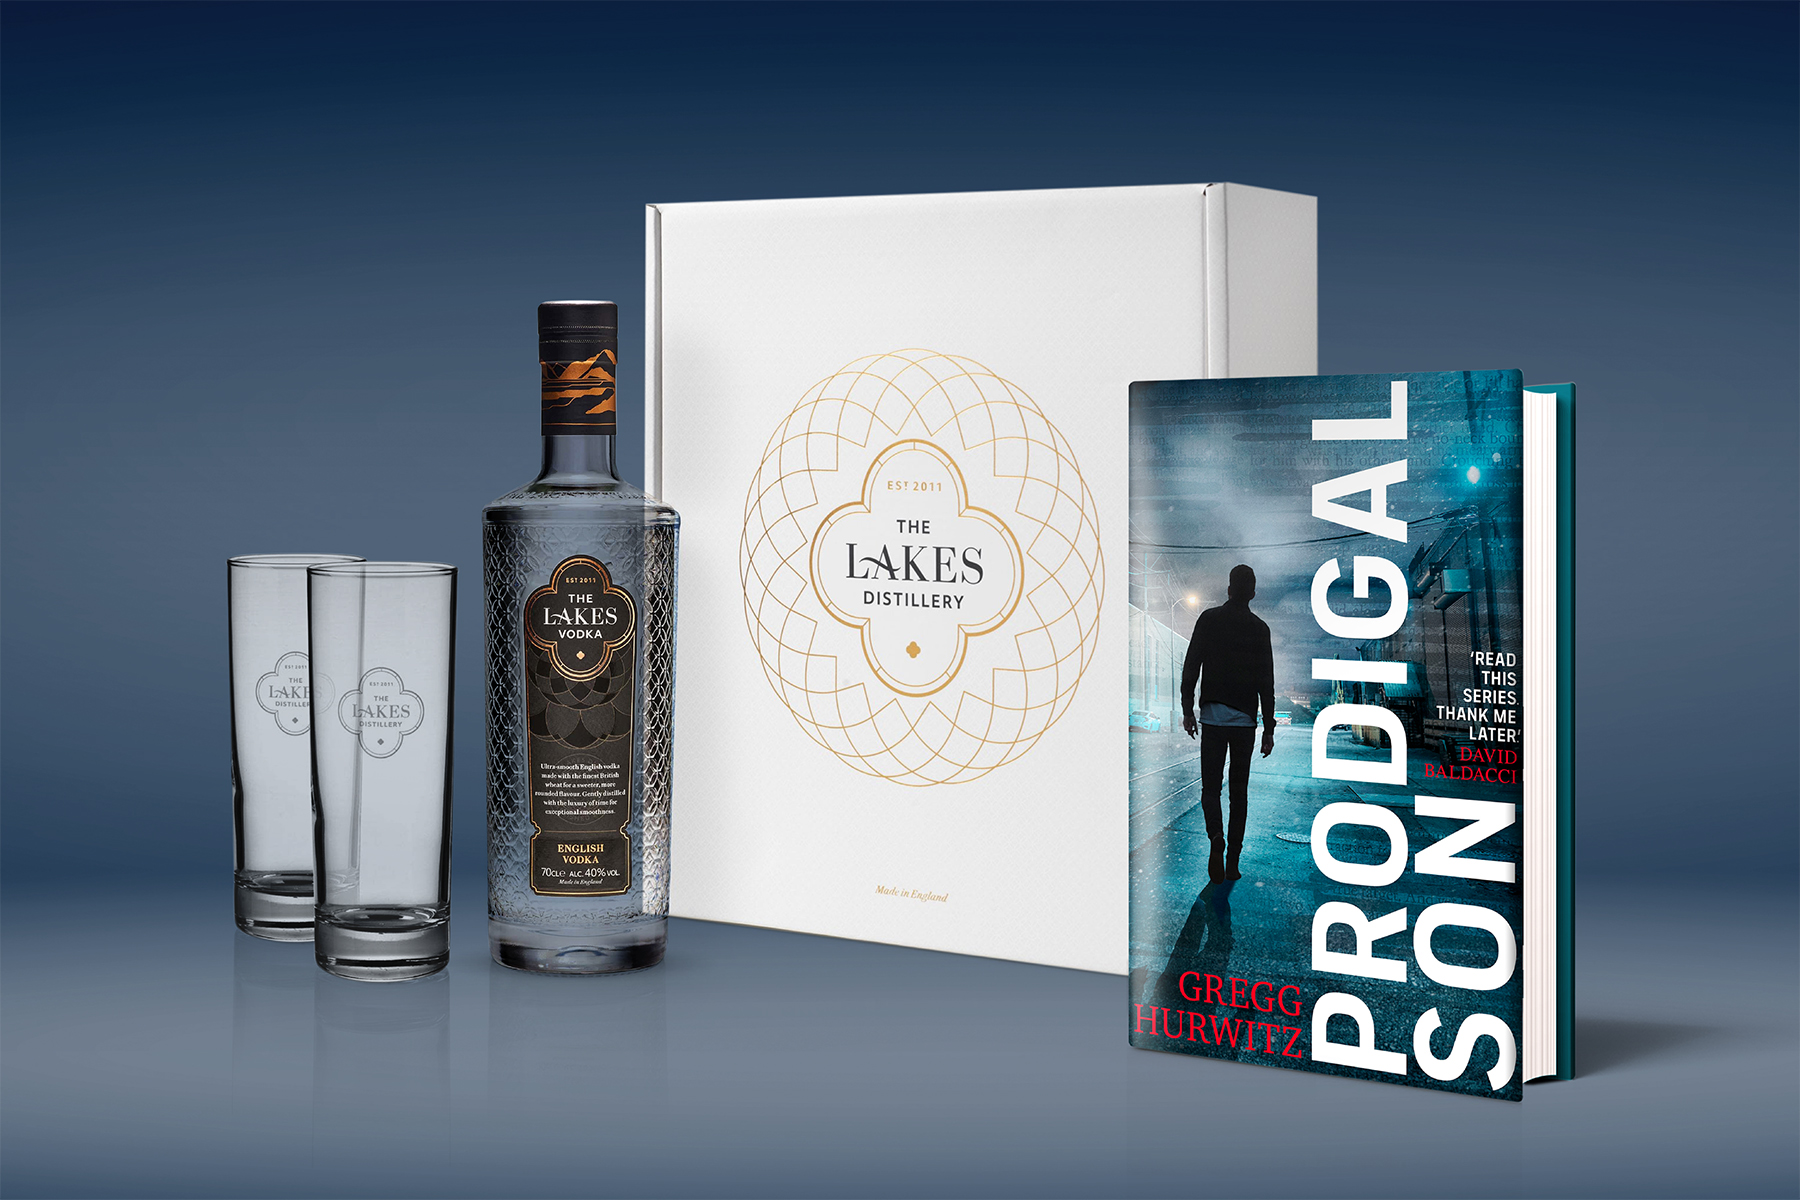 A copy of Prodigal Son and a bottle of The Lakes distillery vodka with two glasses